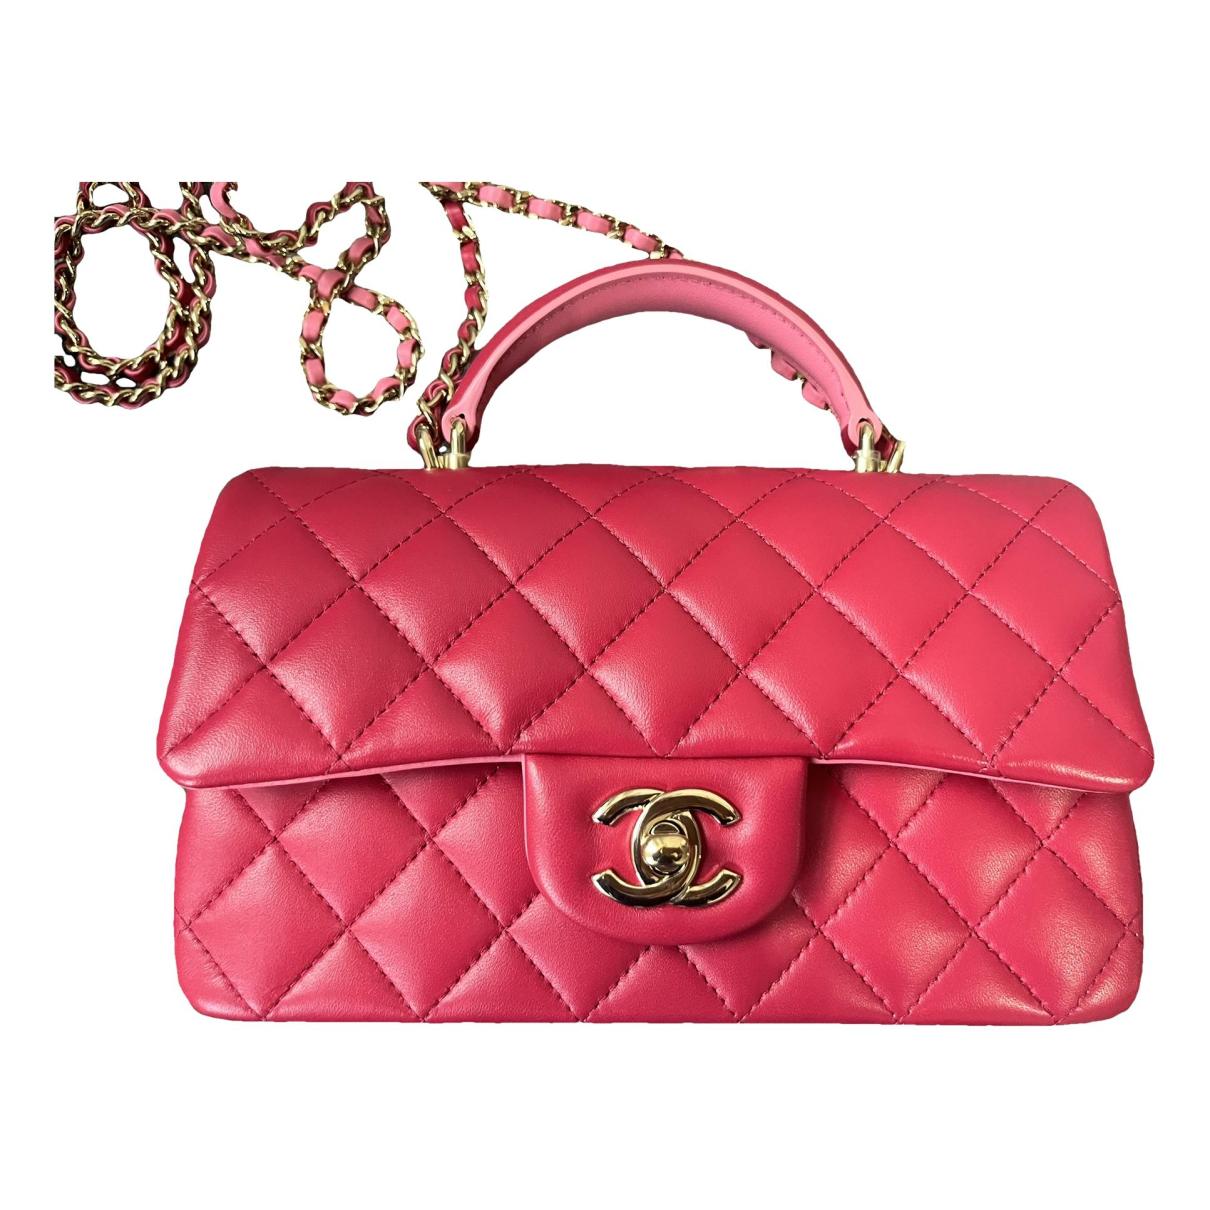 Trendy cc top handle leather handbag Chanel Pink in Leather - 33183451